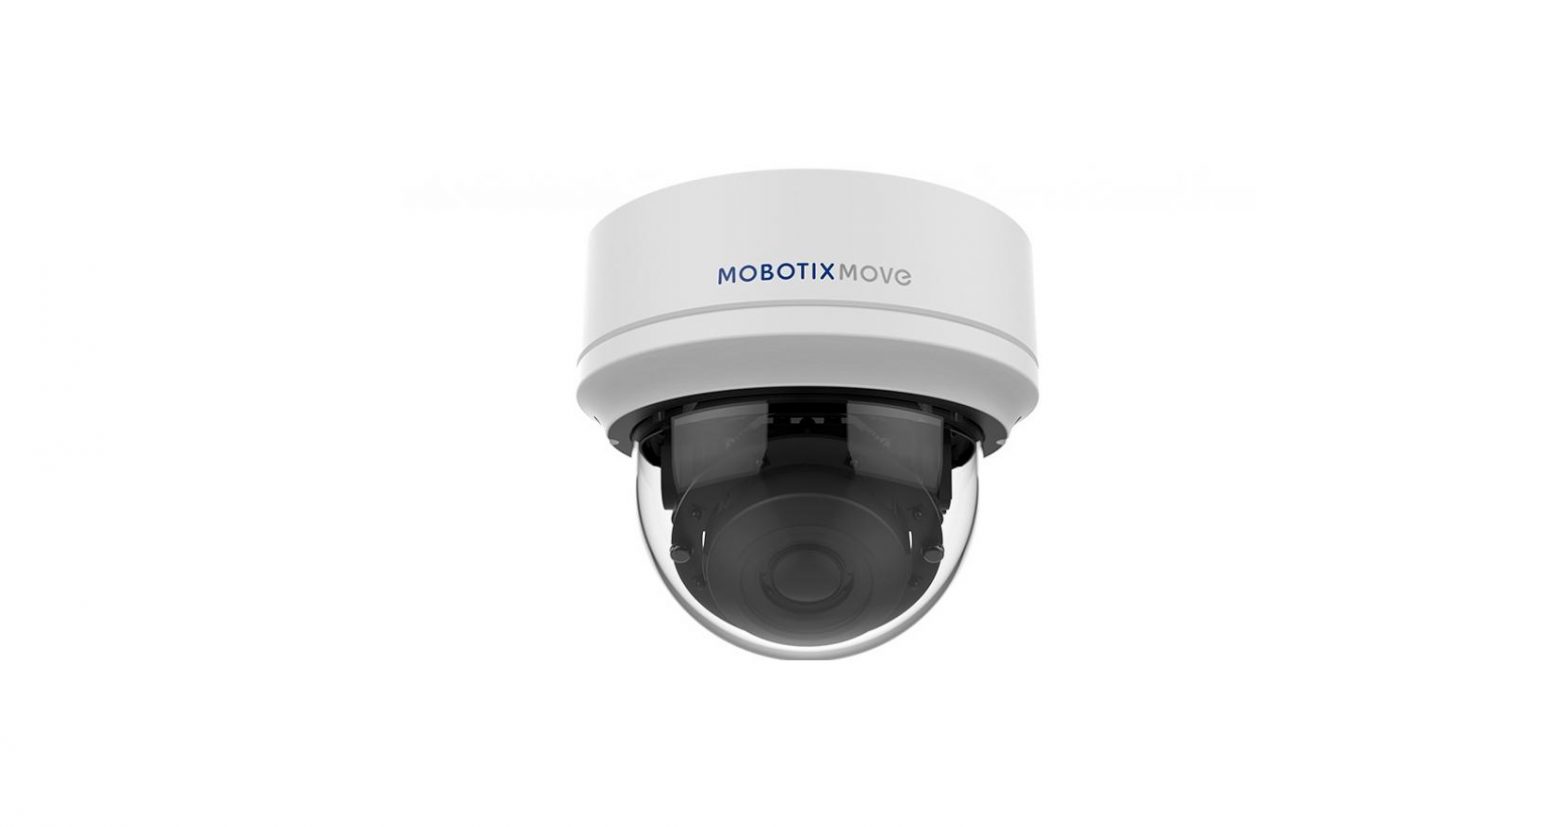 MOBOTIX 2MP Vandal Fixed Dome Analytics Camera Specifications